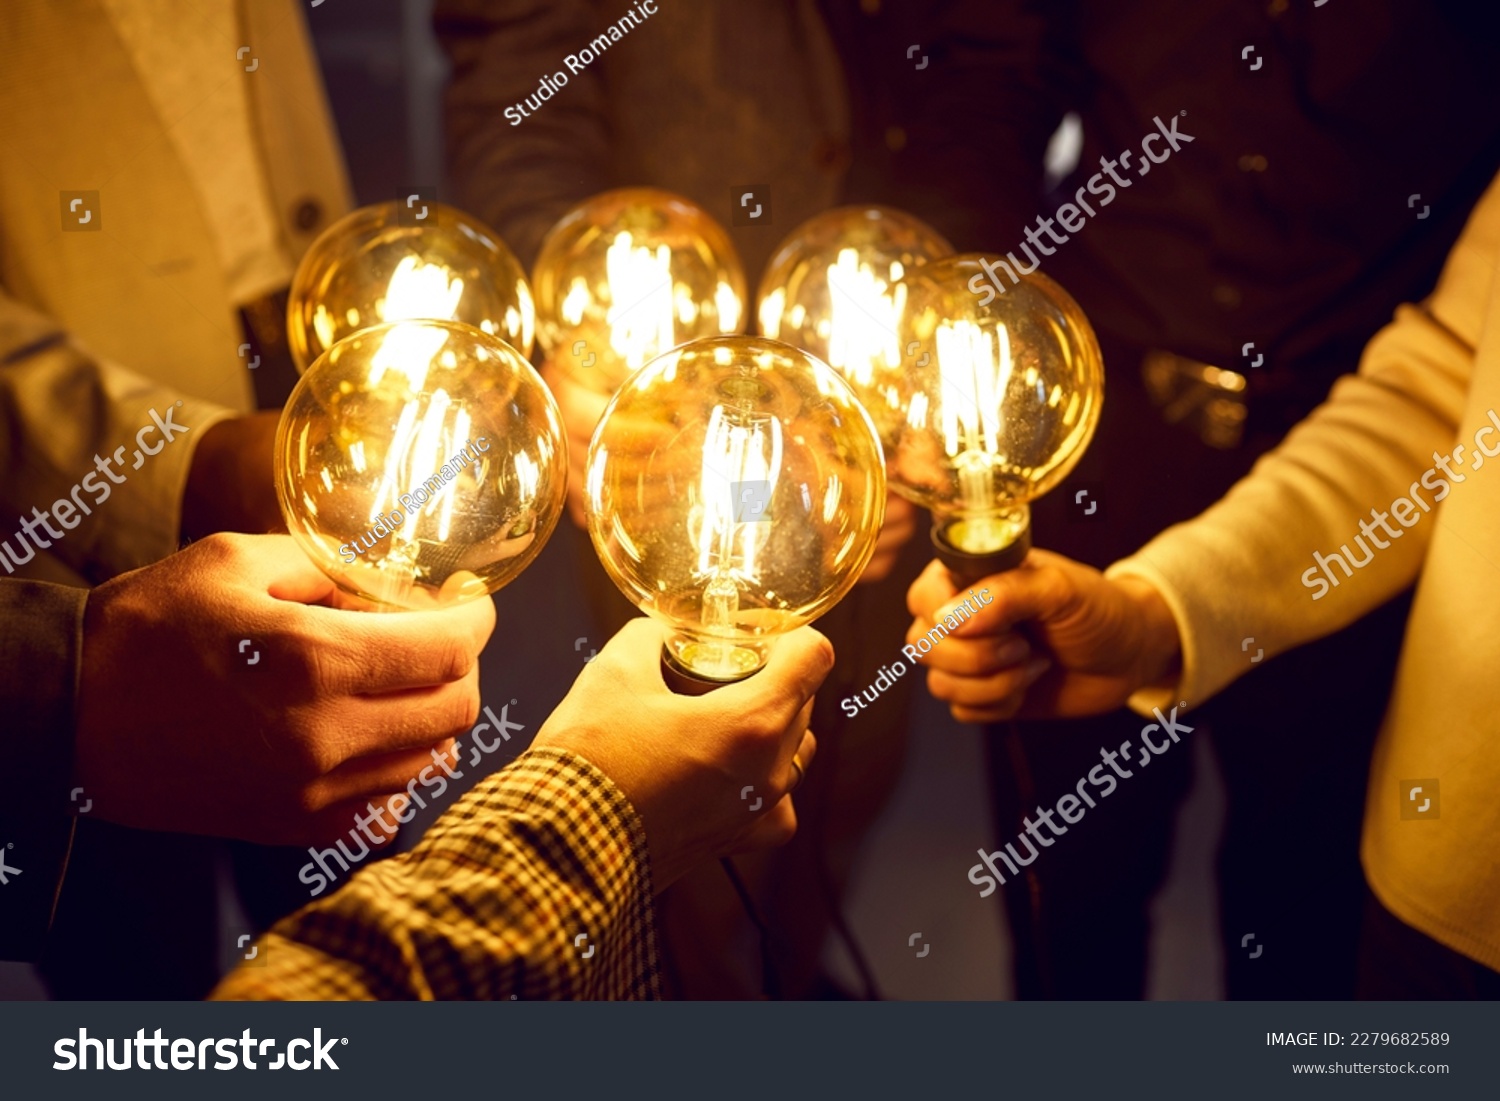 Business team sharing creative energy and developing new ideas. Group of people holding bright glowing electric Edison light bulbs as symbol of idea and innovation. Lightbulbs in human hands, close up #2279682589